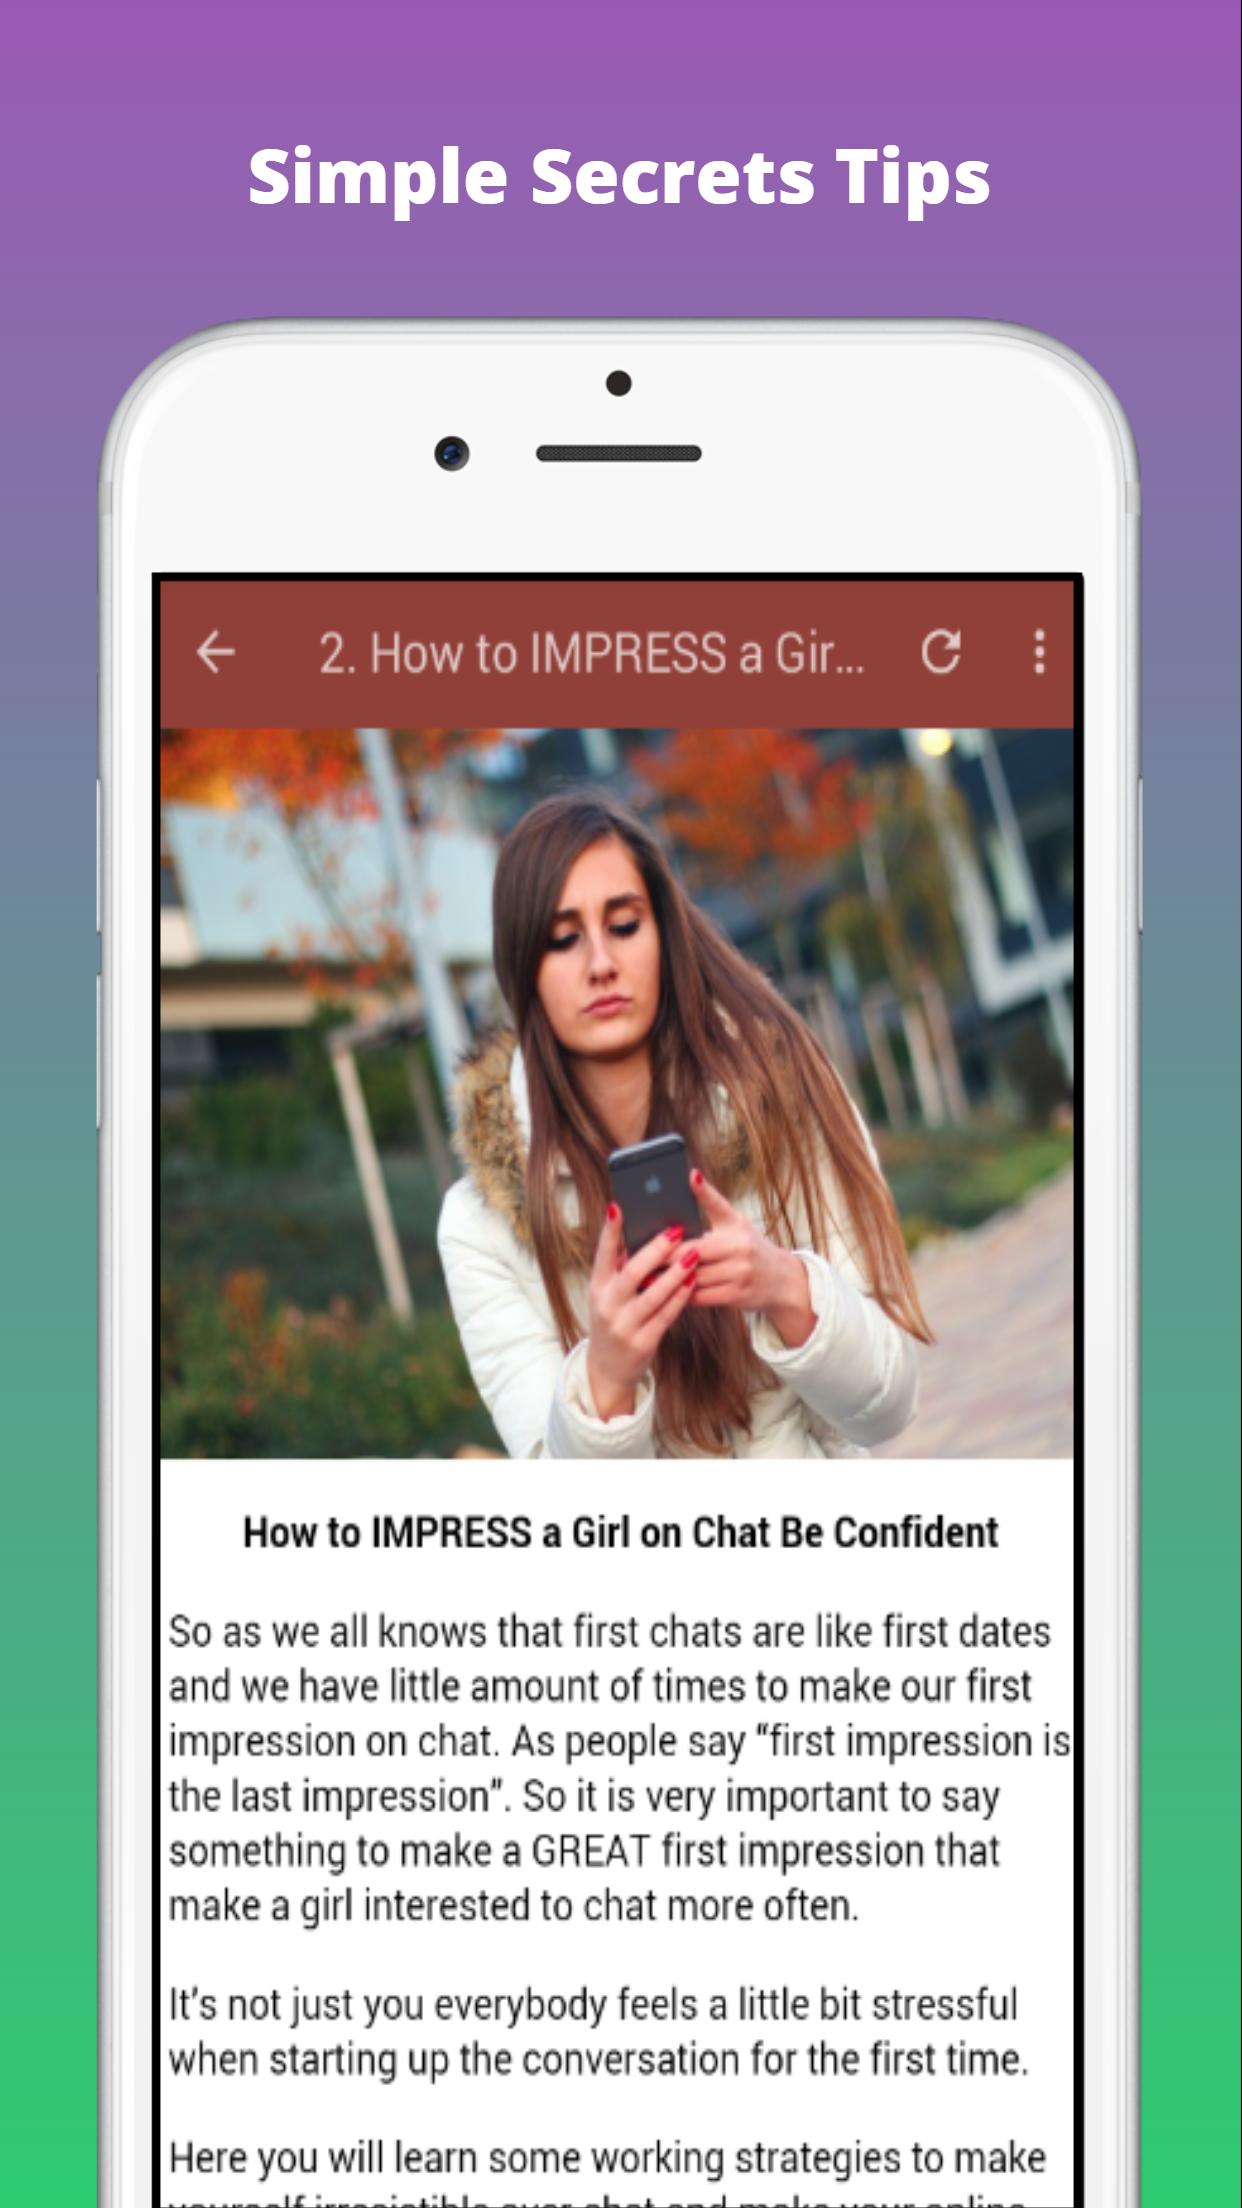 How To Impress A Girl On Chat for Android - APK Download